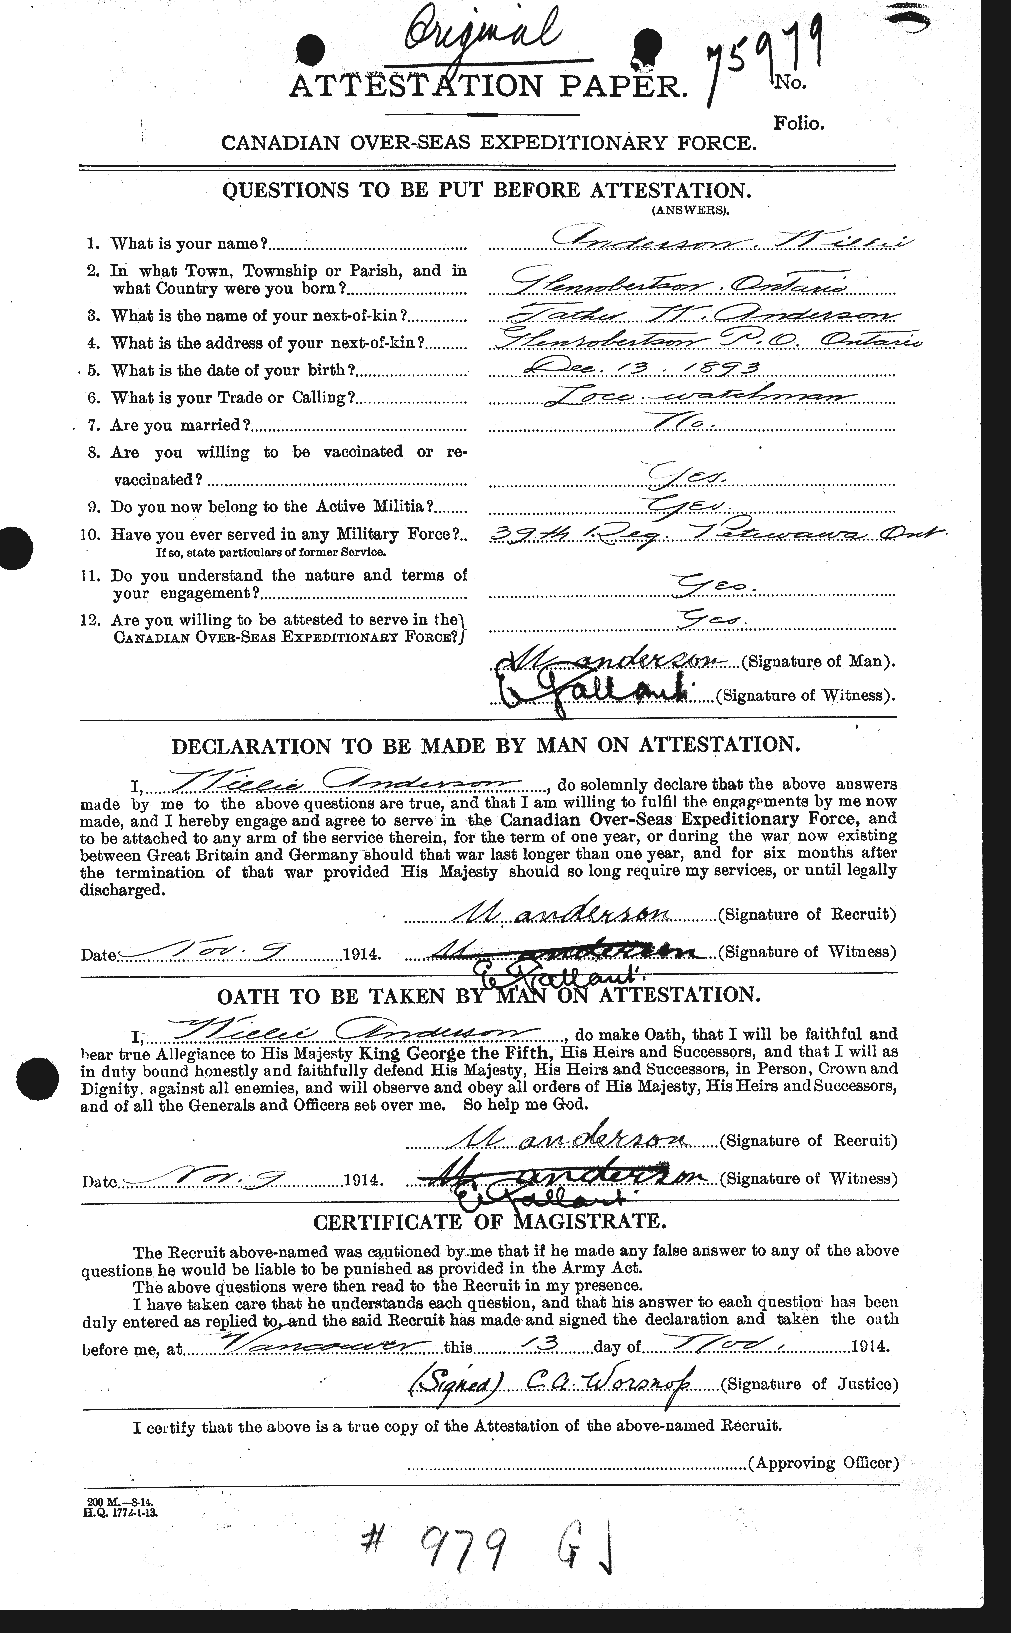 Personnel Records of the First World War - CEF 210666a